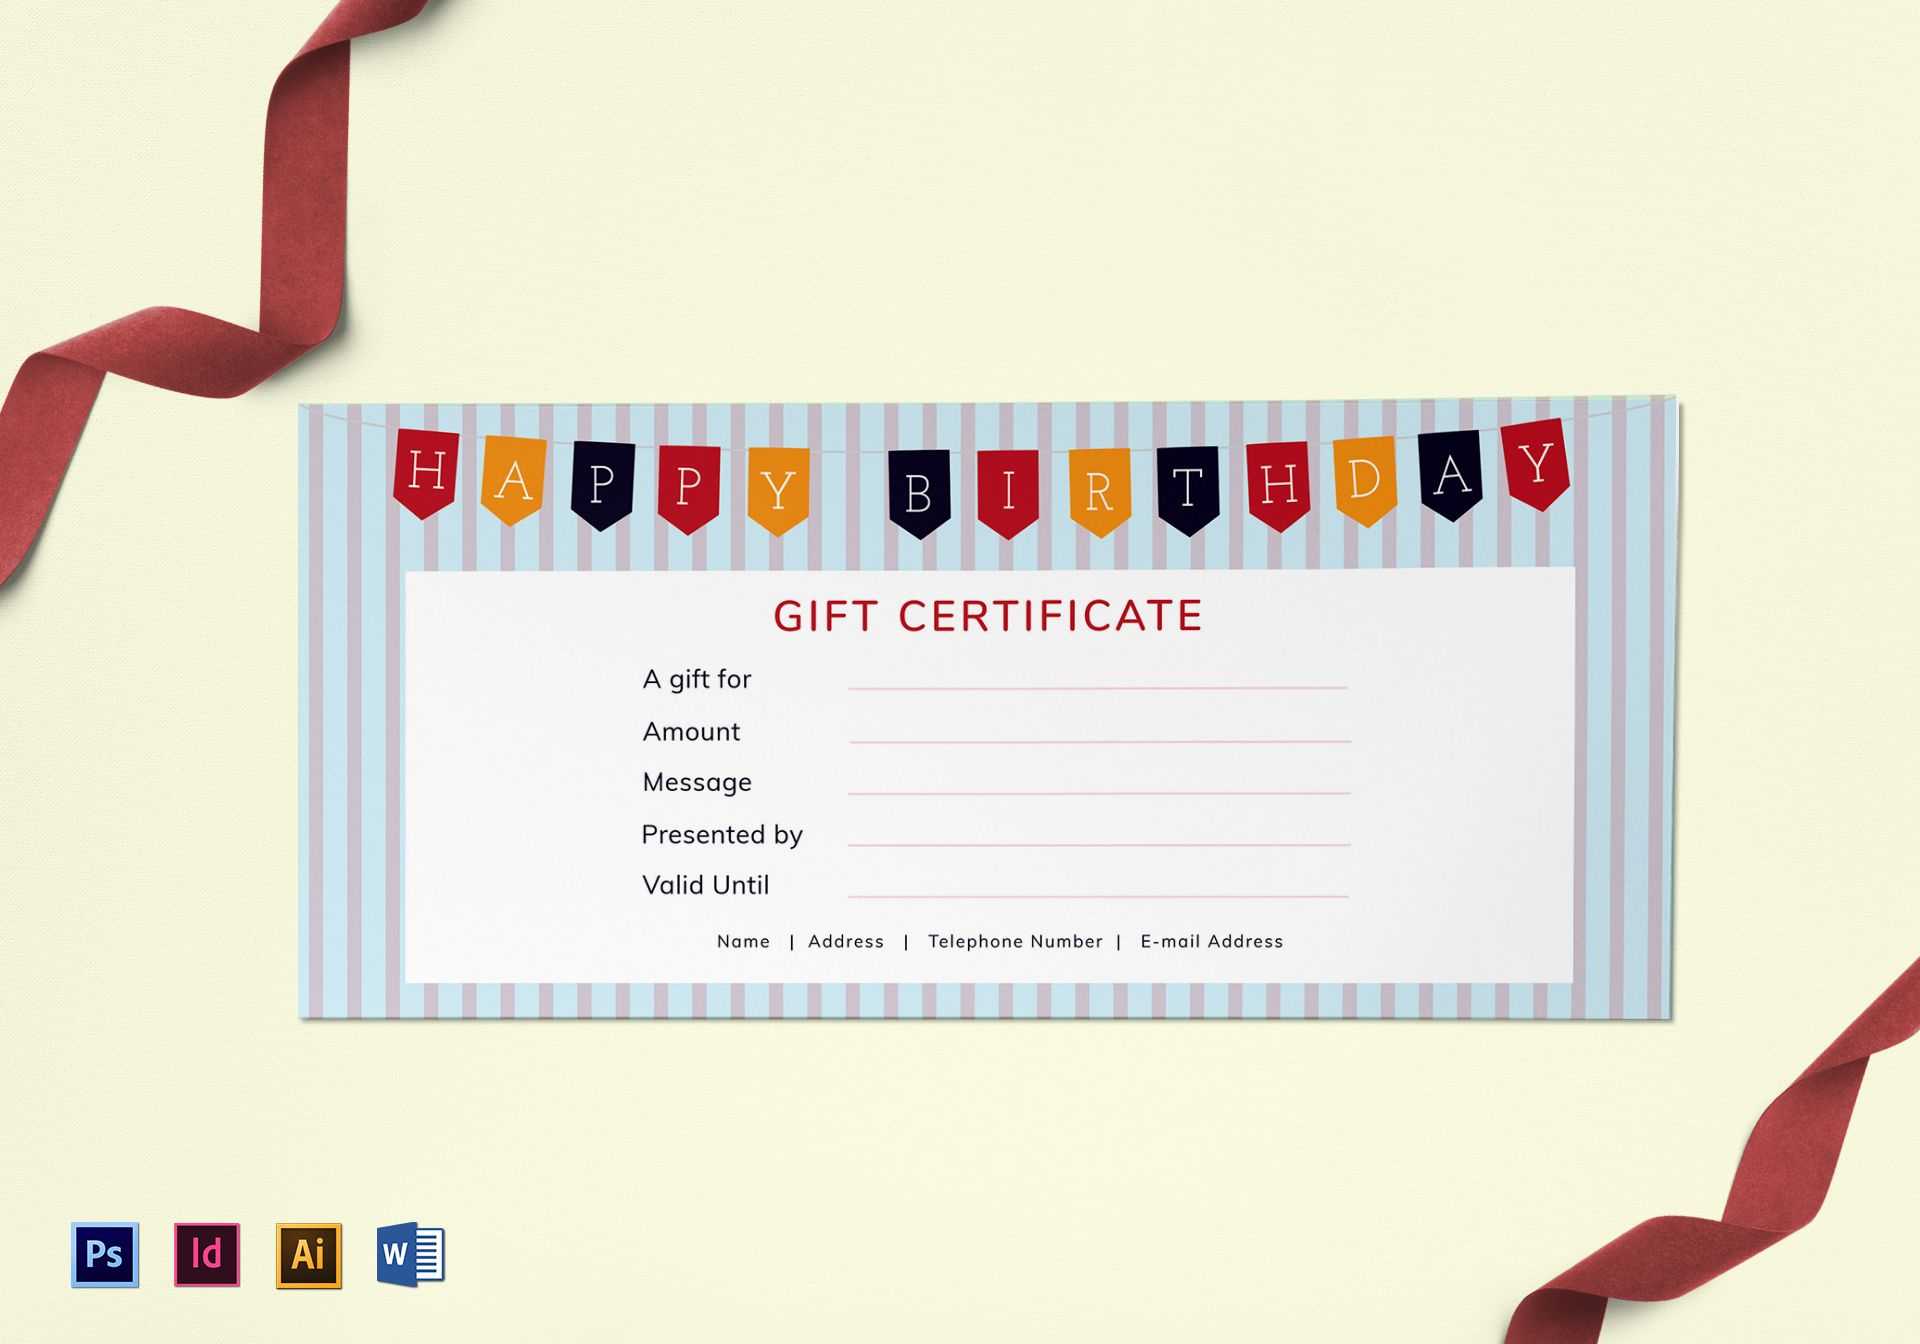 Happy Birthday Gift Certificate Template In Gift Card Template Illustrator